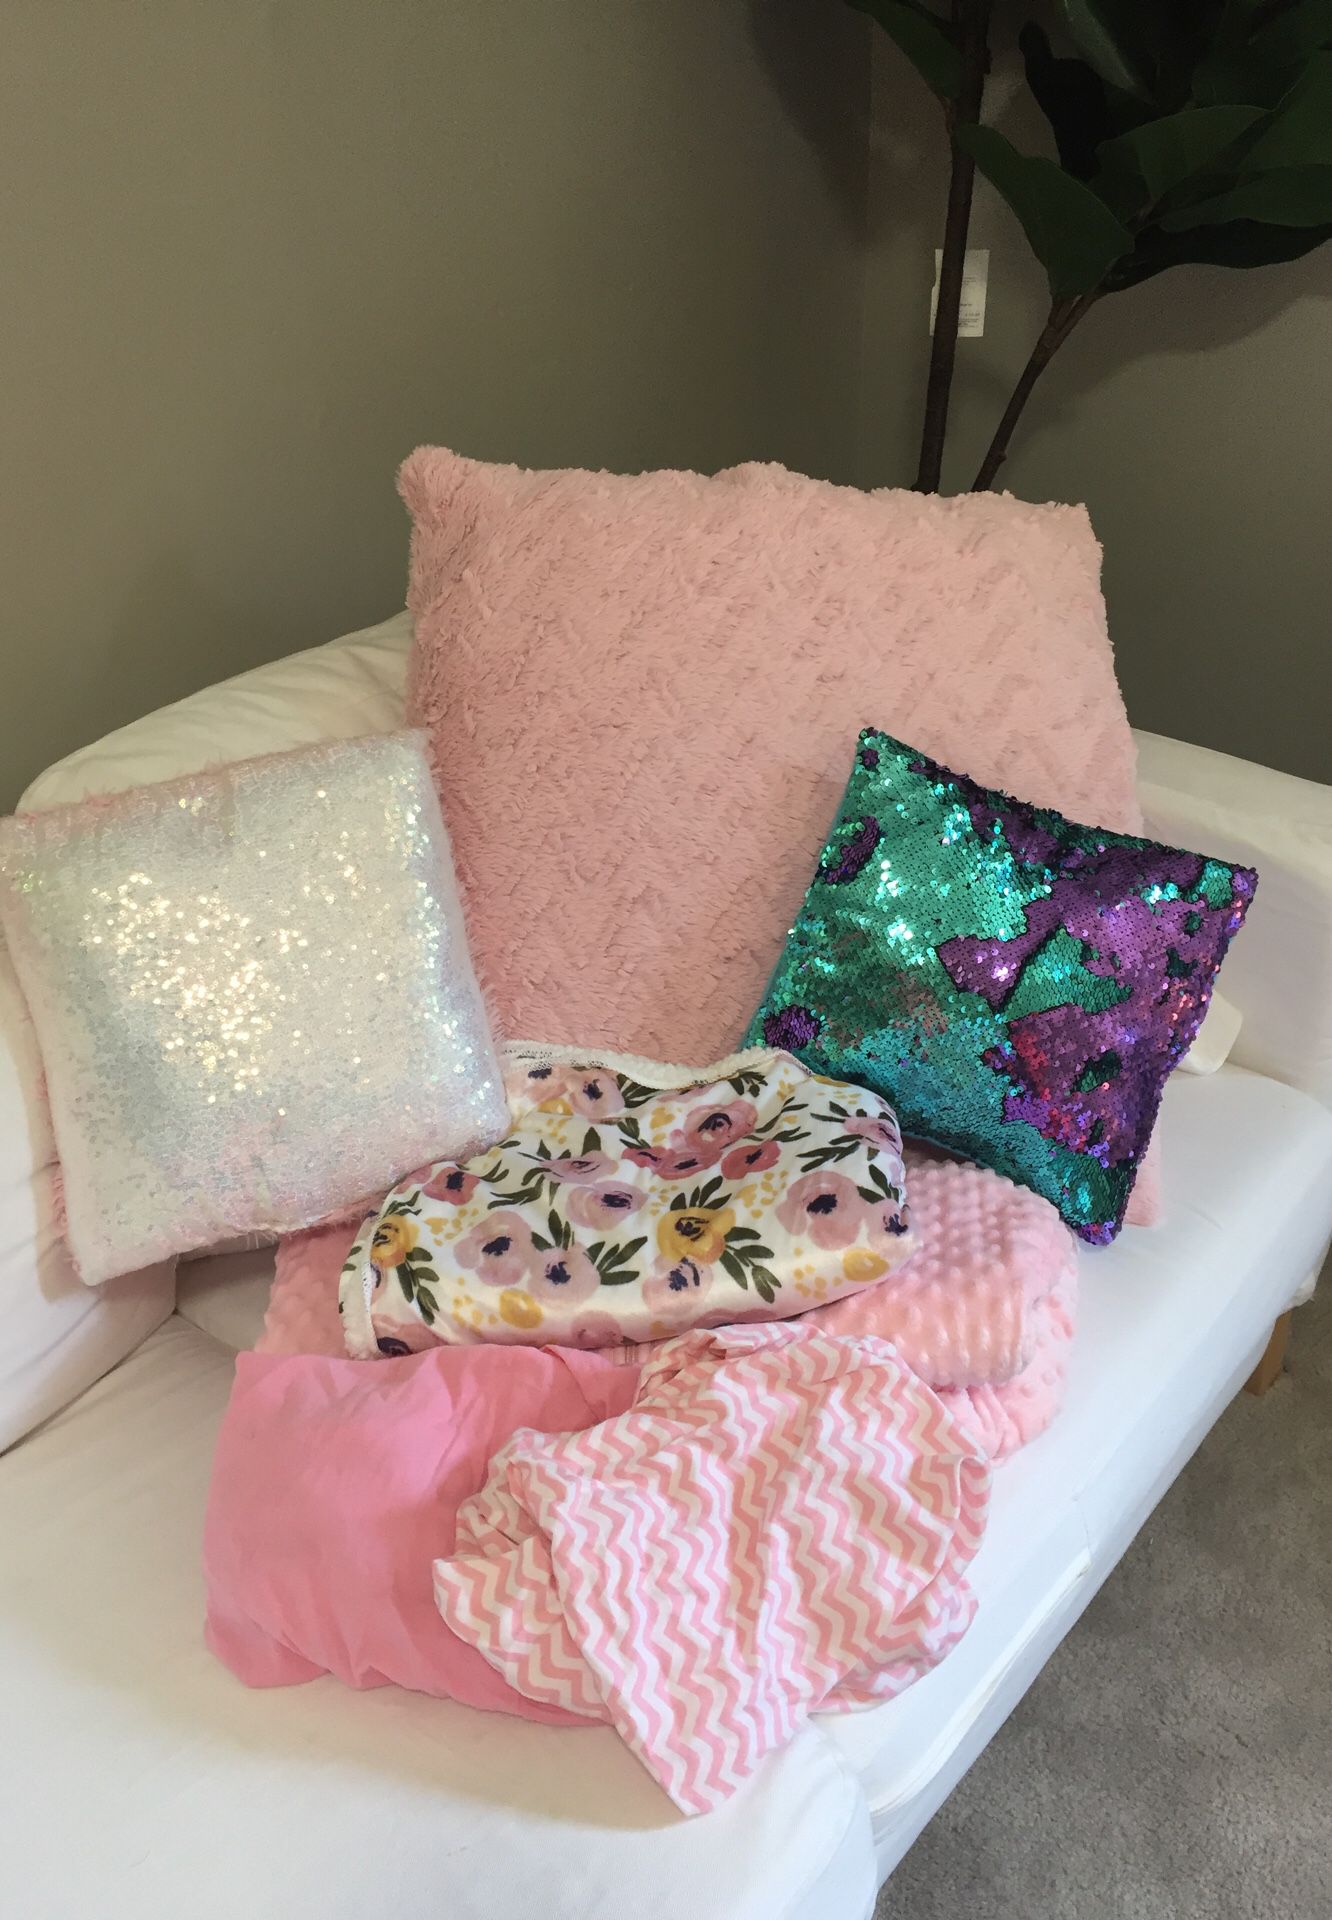 Baby blankets/pillows/ sleeper and crib sheets!